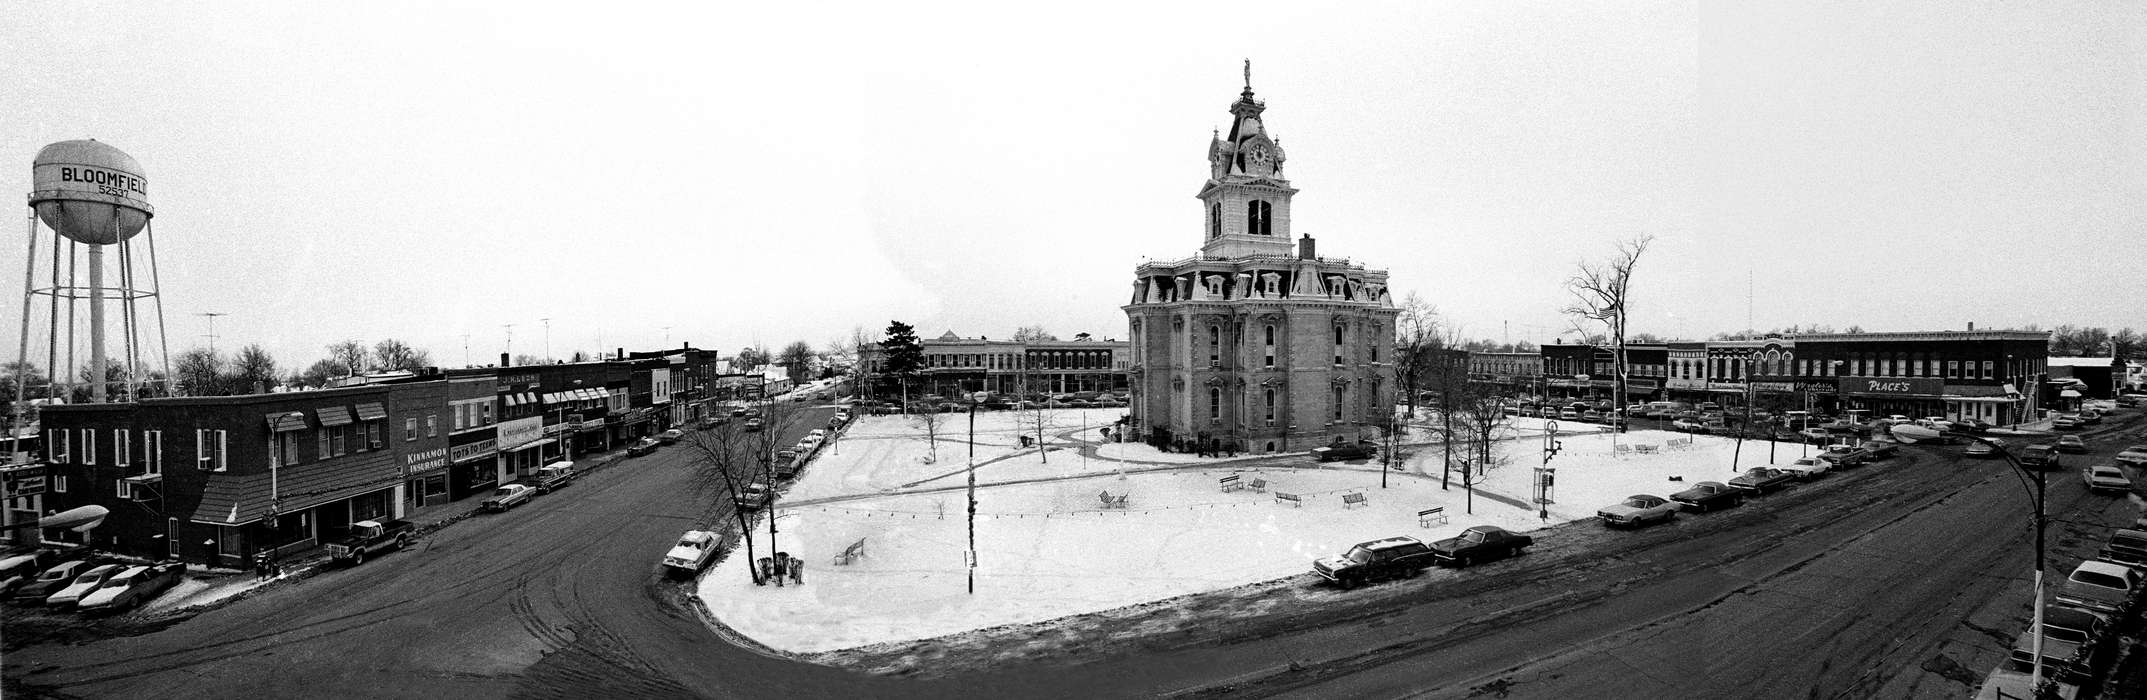 snow, storefront, christmas decorations, Winter, park, courthouse, town square, Cities and Towns, tower, Bloomfield, IA, history of Iowa, Motorized Vehicles, Businesses and Factories, Iowa History, car, water tower, park bench, Iowa, Lemberger, LeAnn, Main Streets & Town Squares, Aerial Shots, store, clock, Prisons and Criminal Justice